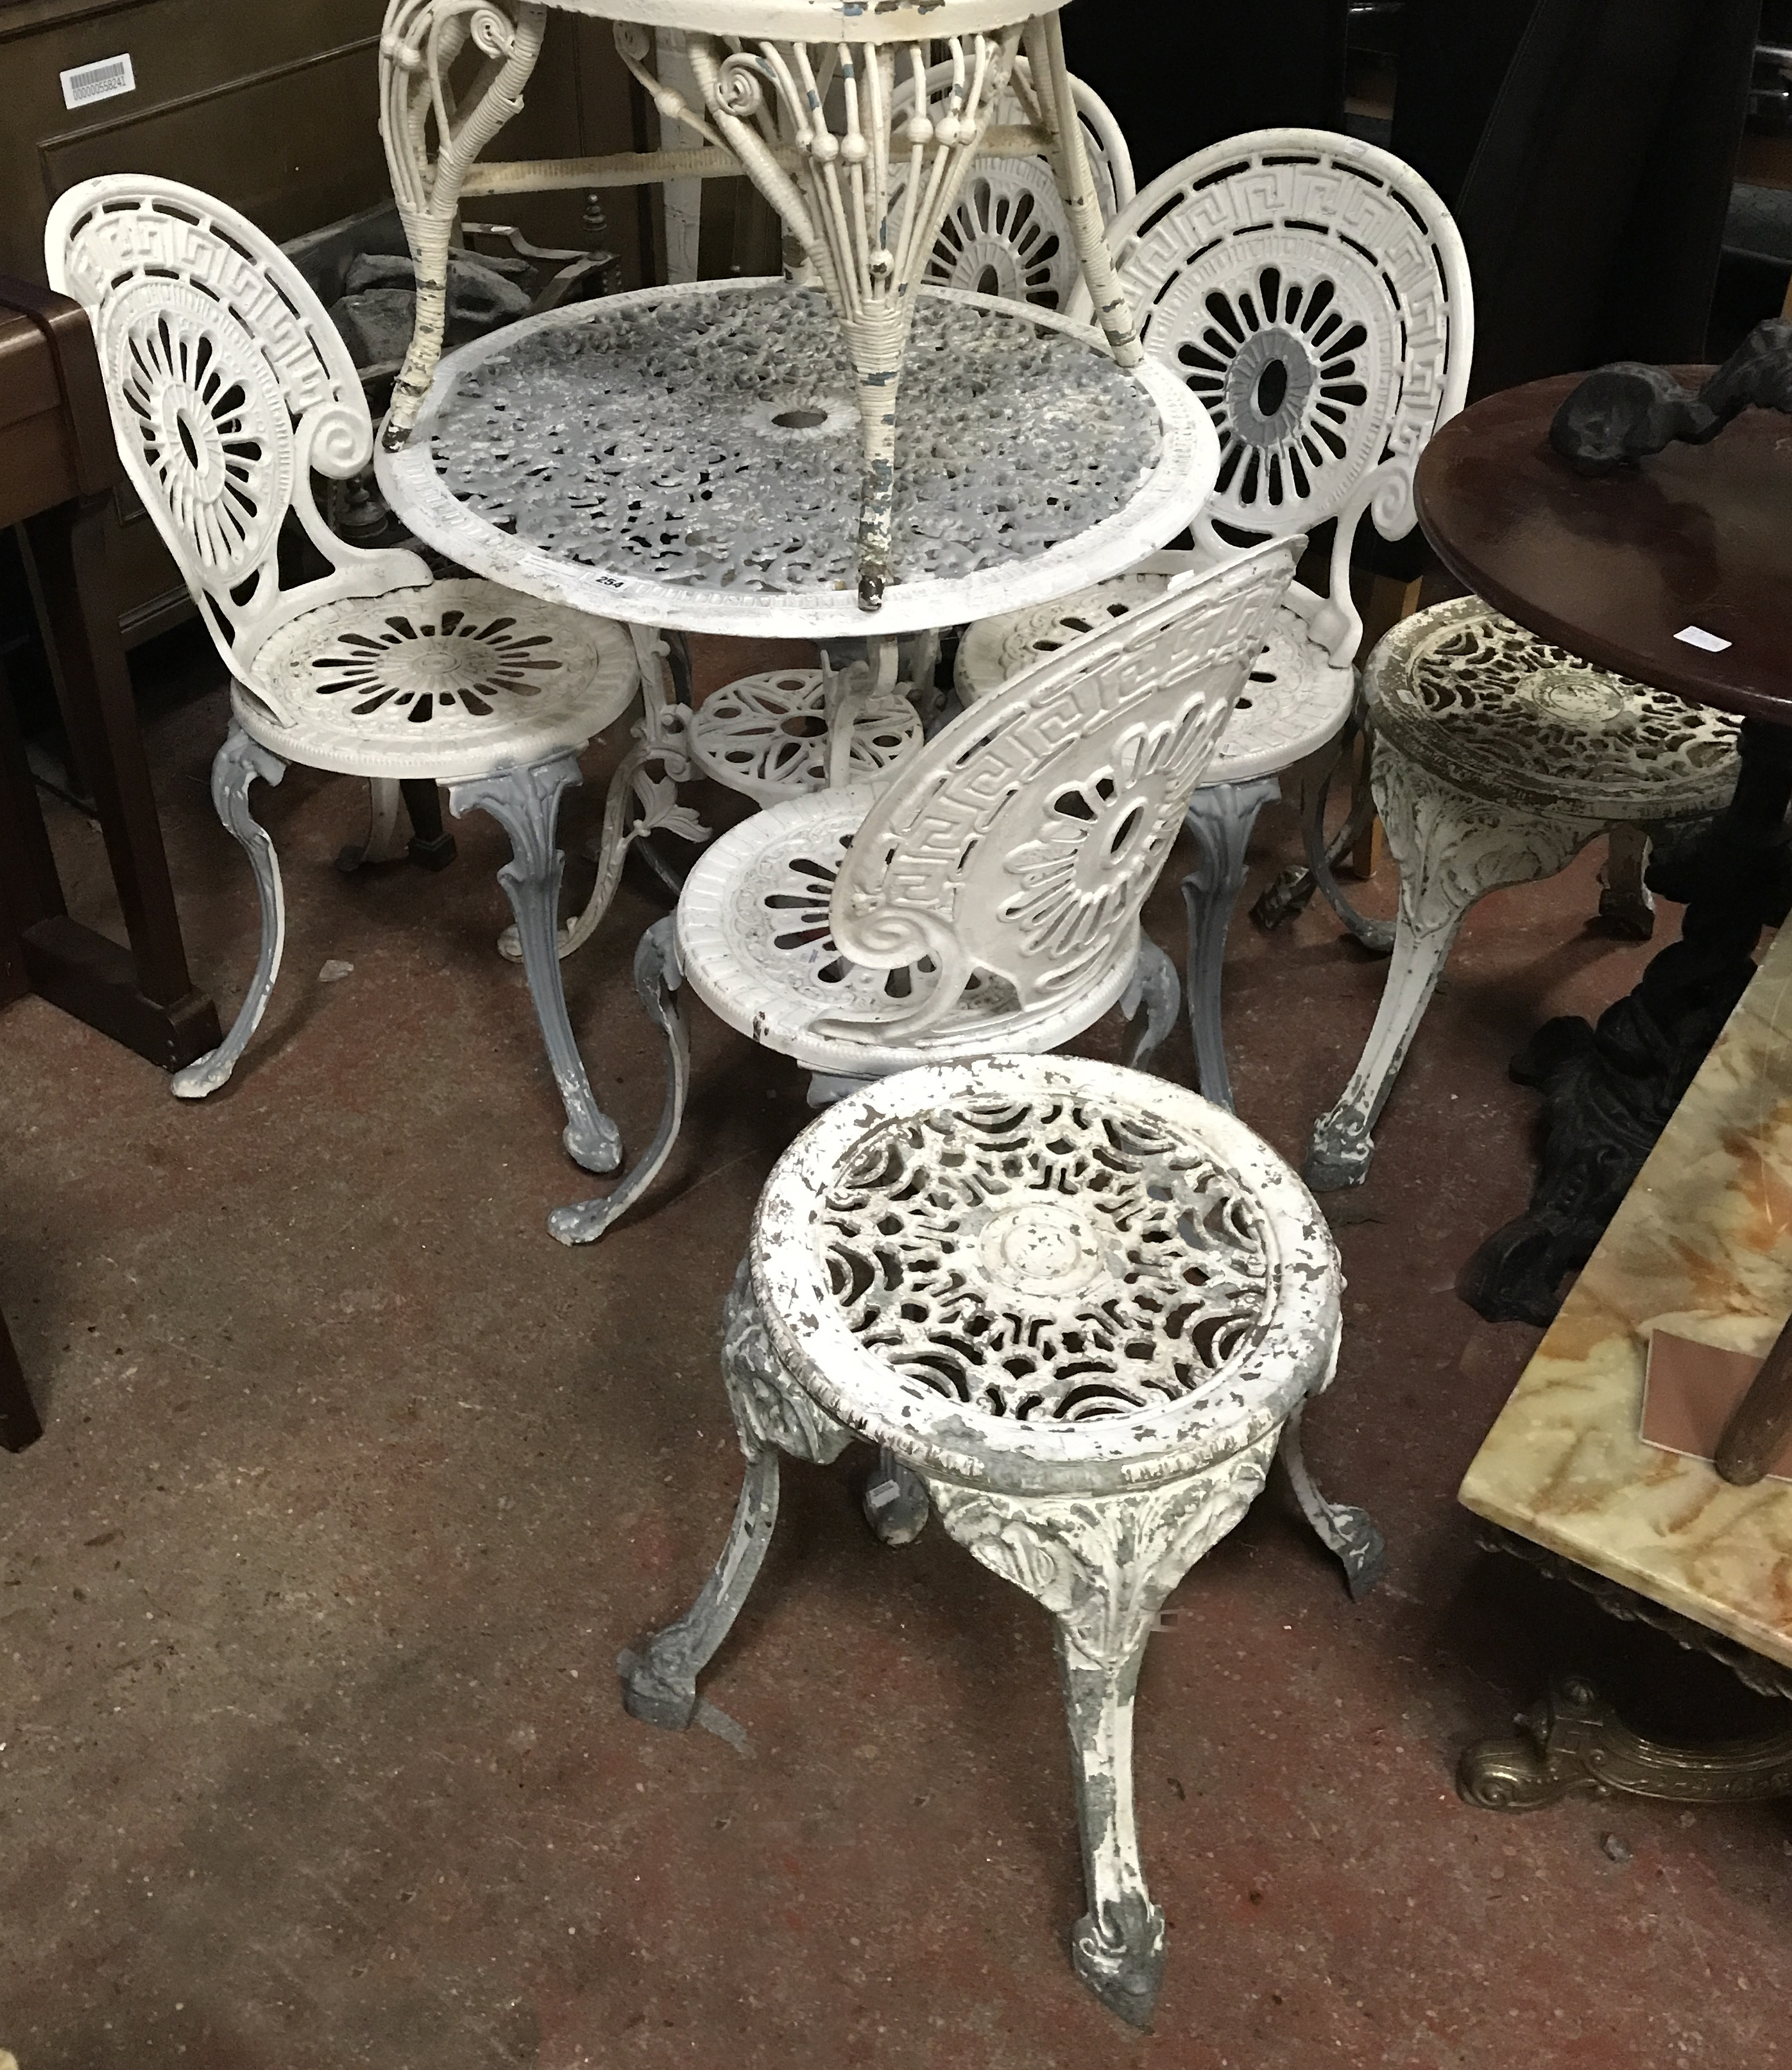 METAL GARDEN TABLE - 4 CHAIRS & 2 STOOLS